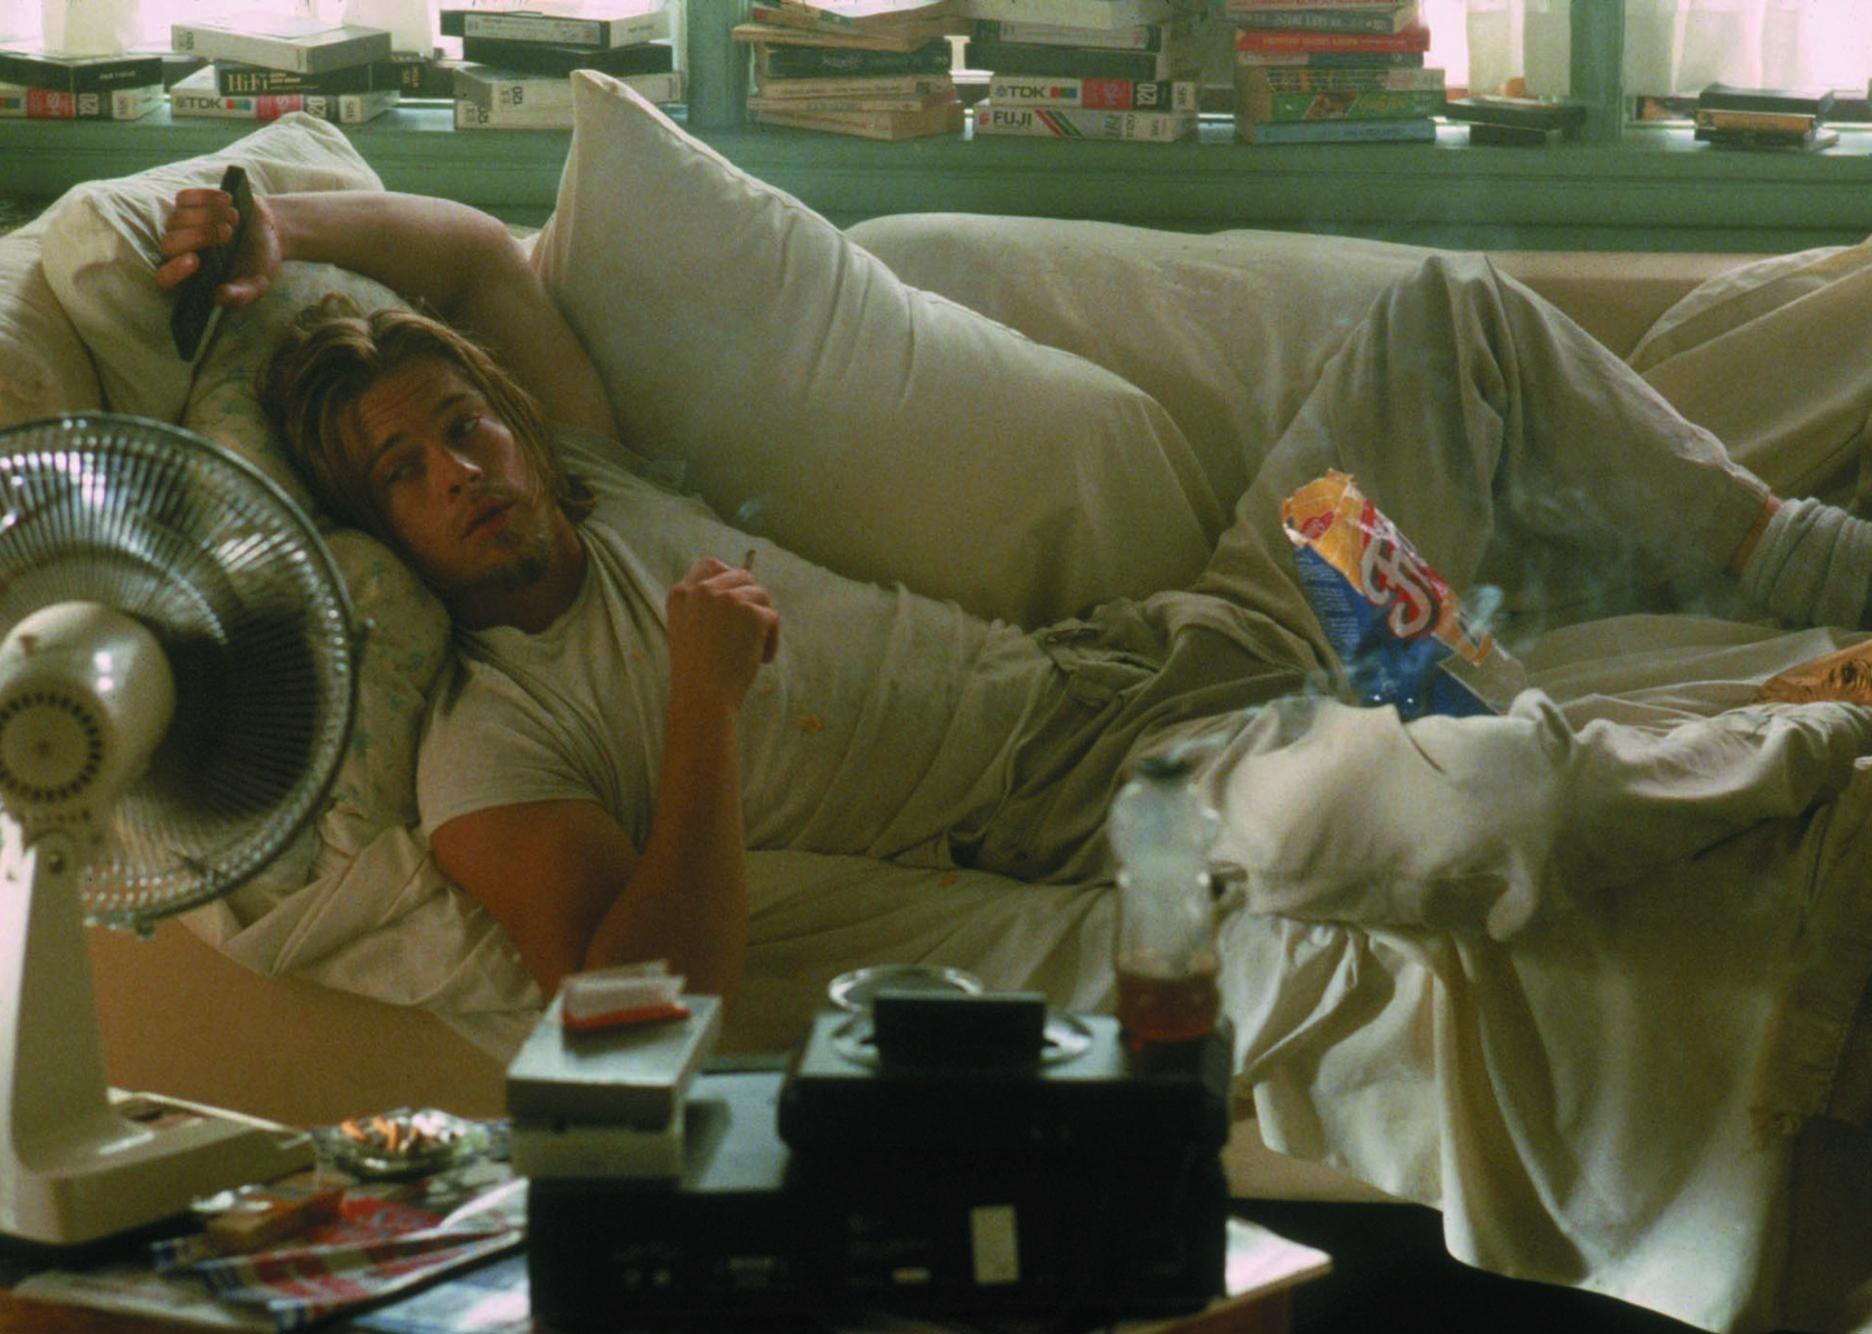 Brad Pitt lying on a couch with food, looking dirty.